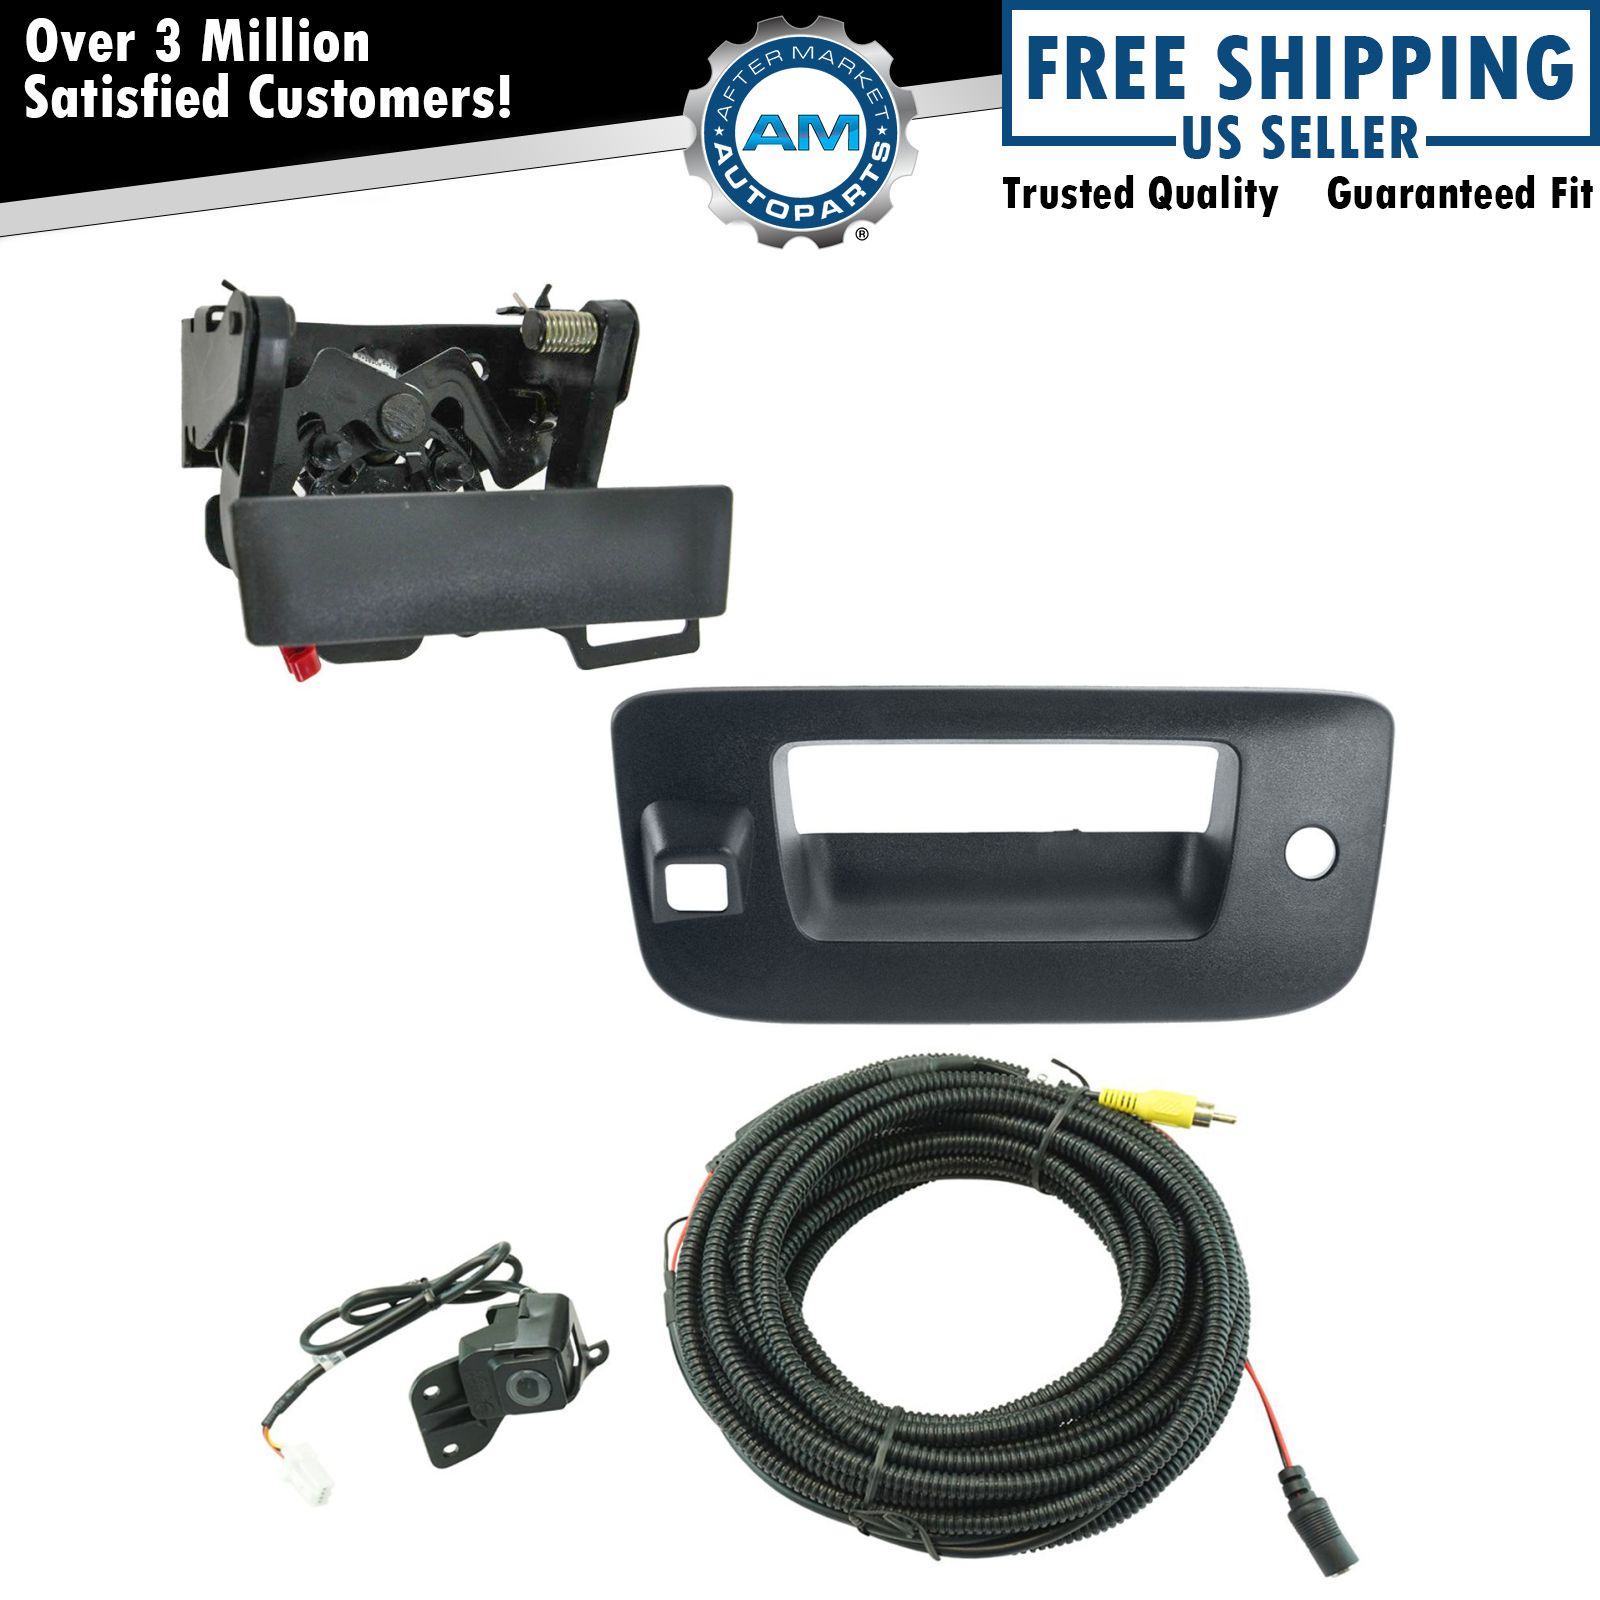 Rear View Camera Add On Kit w/ Wiring Harness Tailgate Handle & Bezel for Chevy